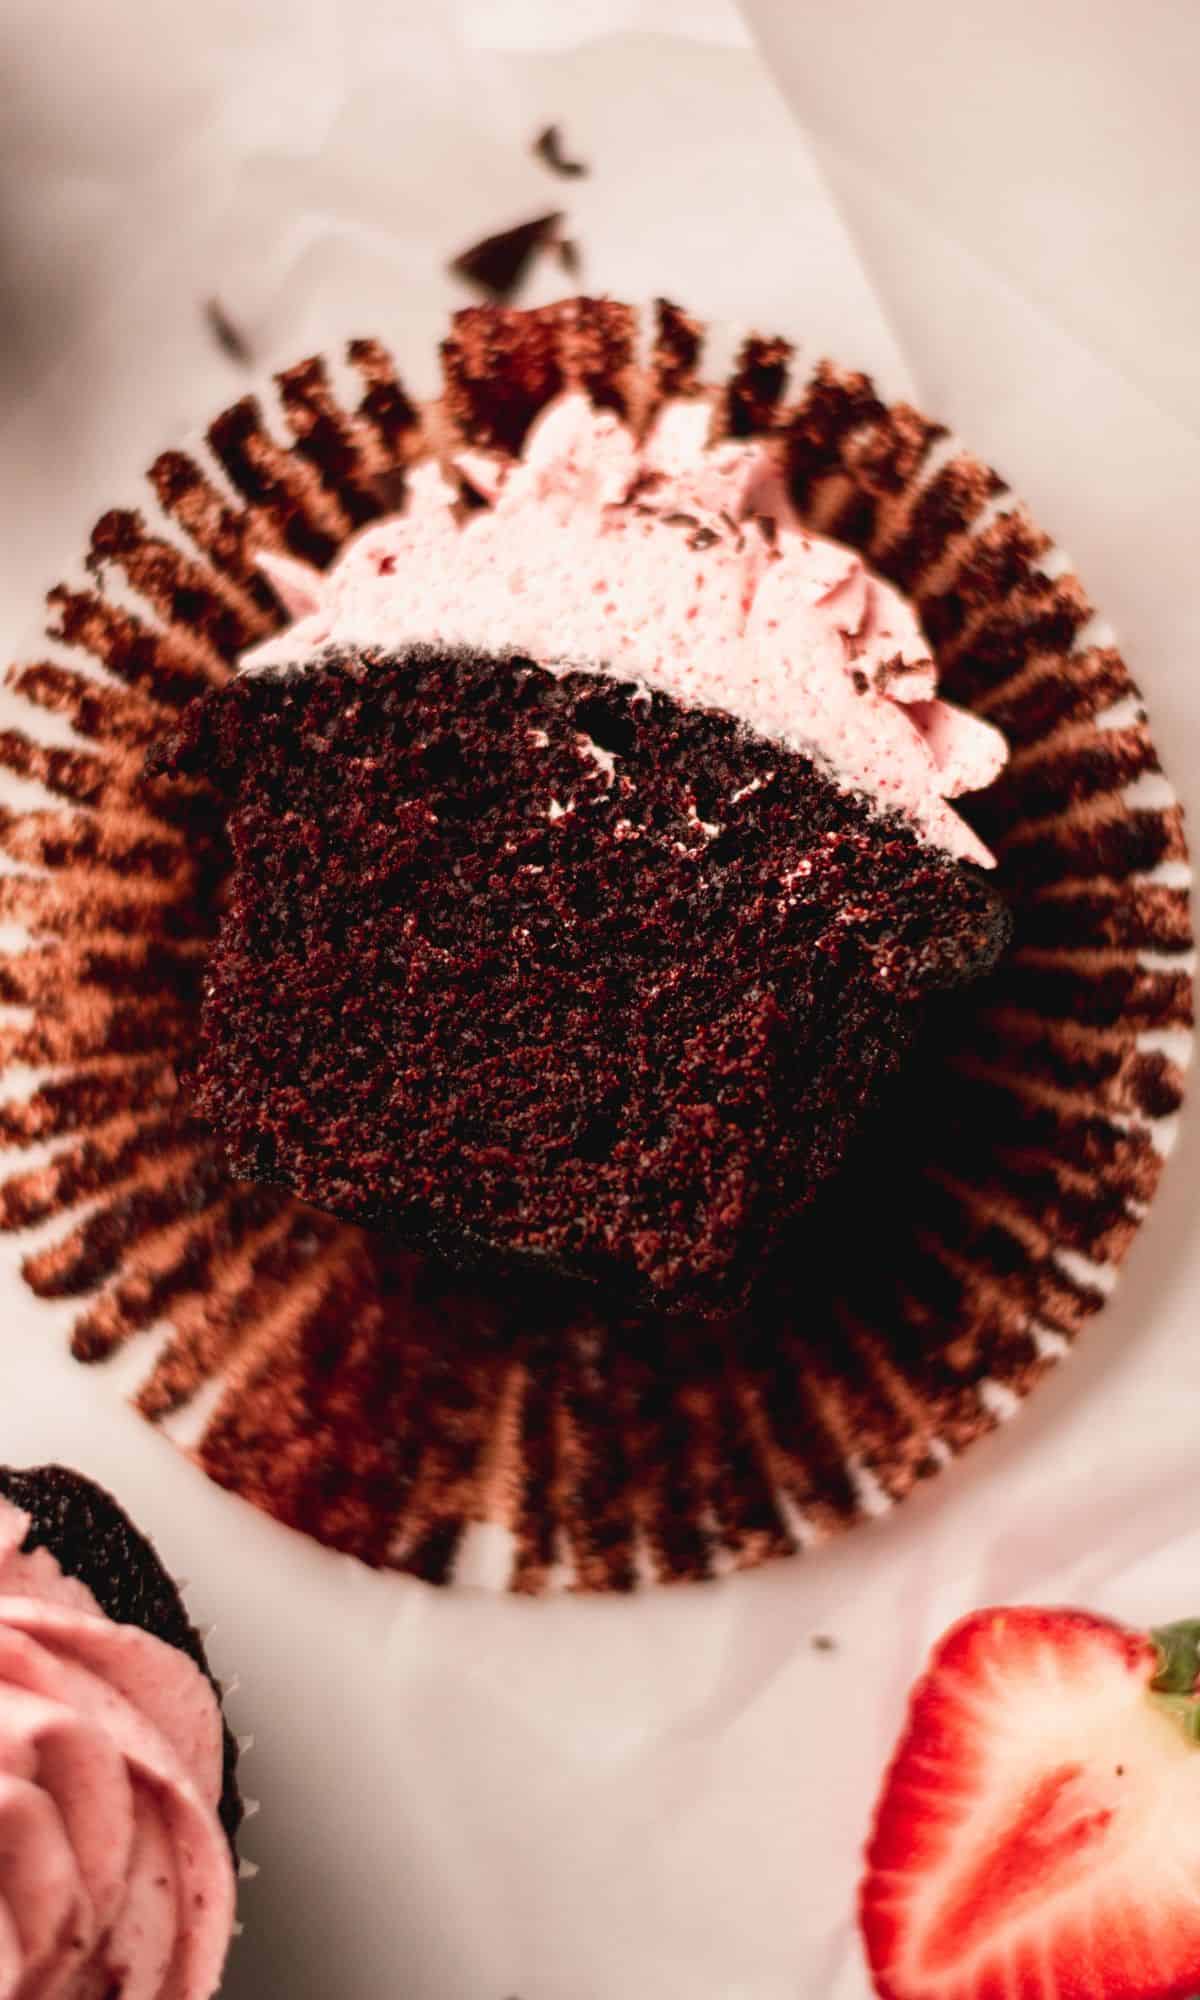 A cross section shot of a halved chocolate cupcake with strawberry buttercream frosting.